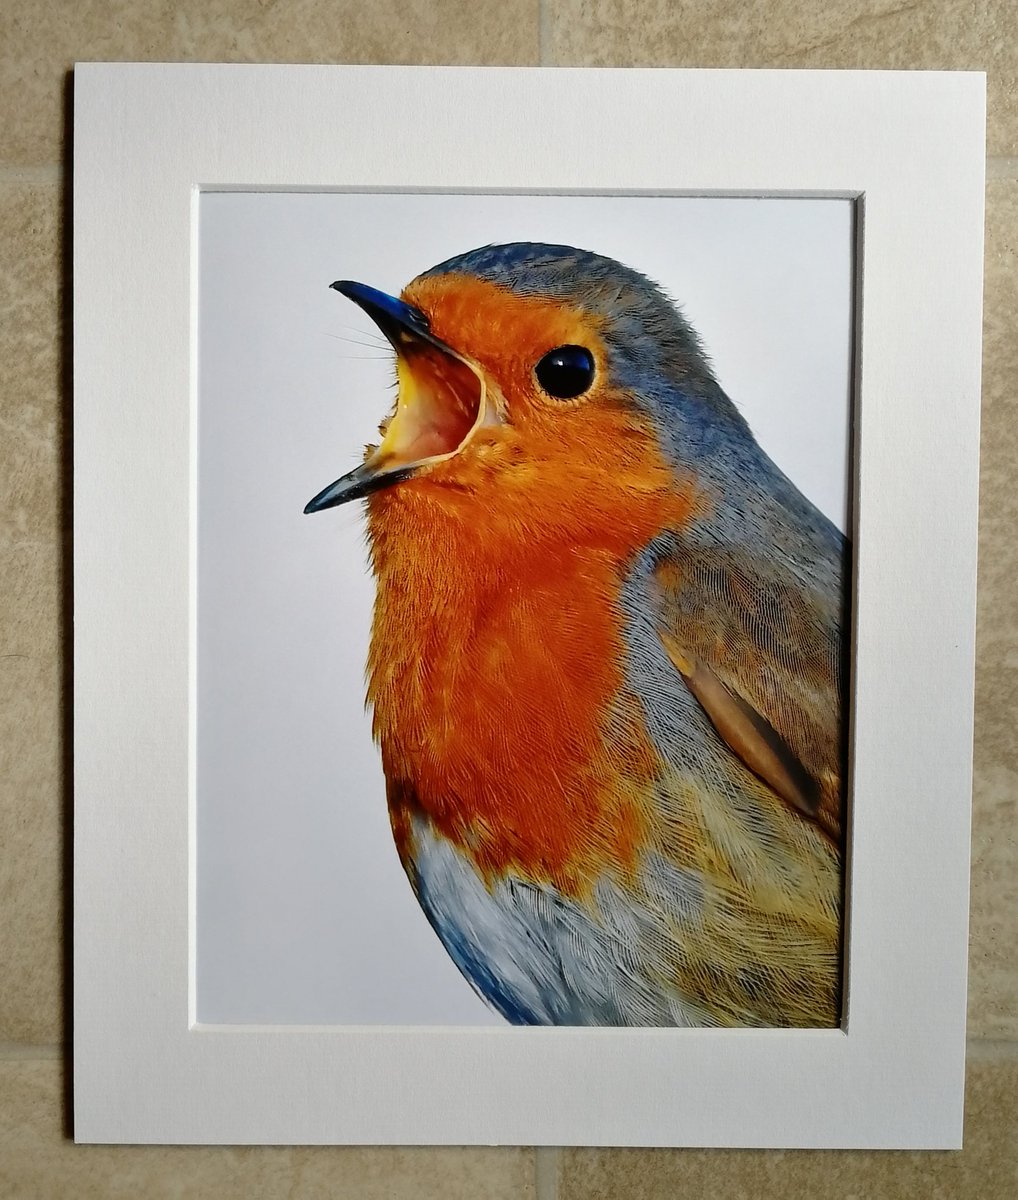 'Singing Robin portrait'10x8 mounted print. You can buy it here; https://www.carlbovis.com/product-page/singing-robin-portrait-10x8-mounted-print 